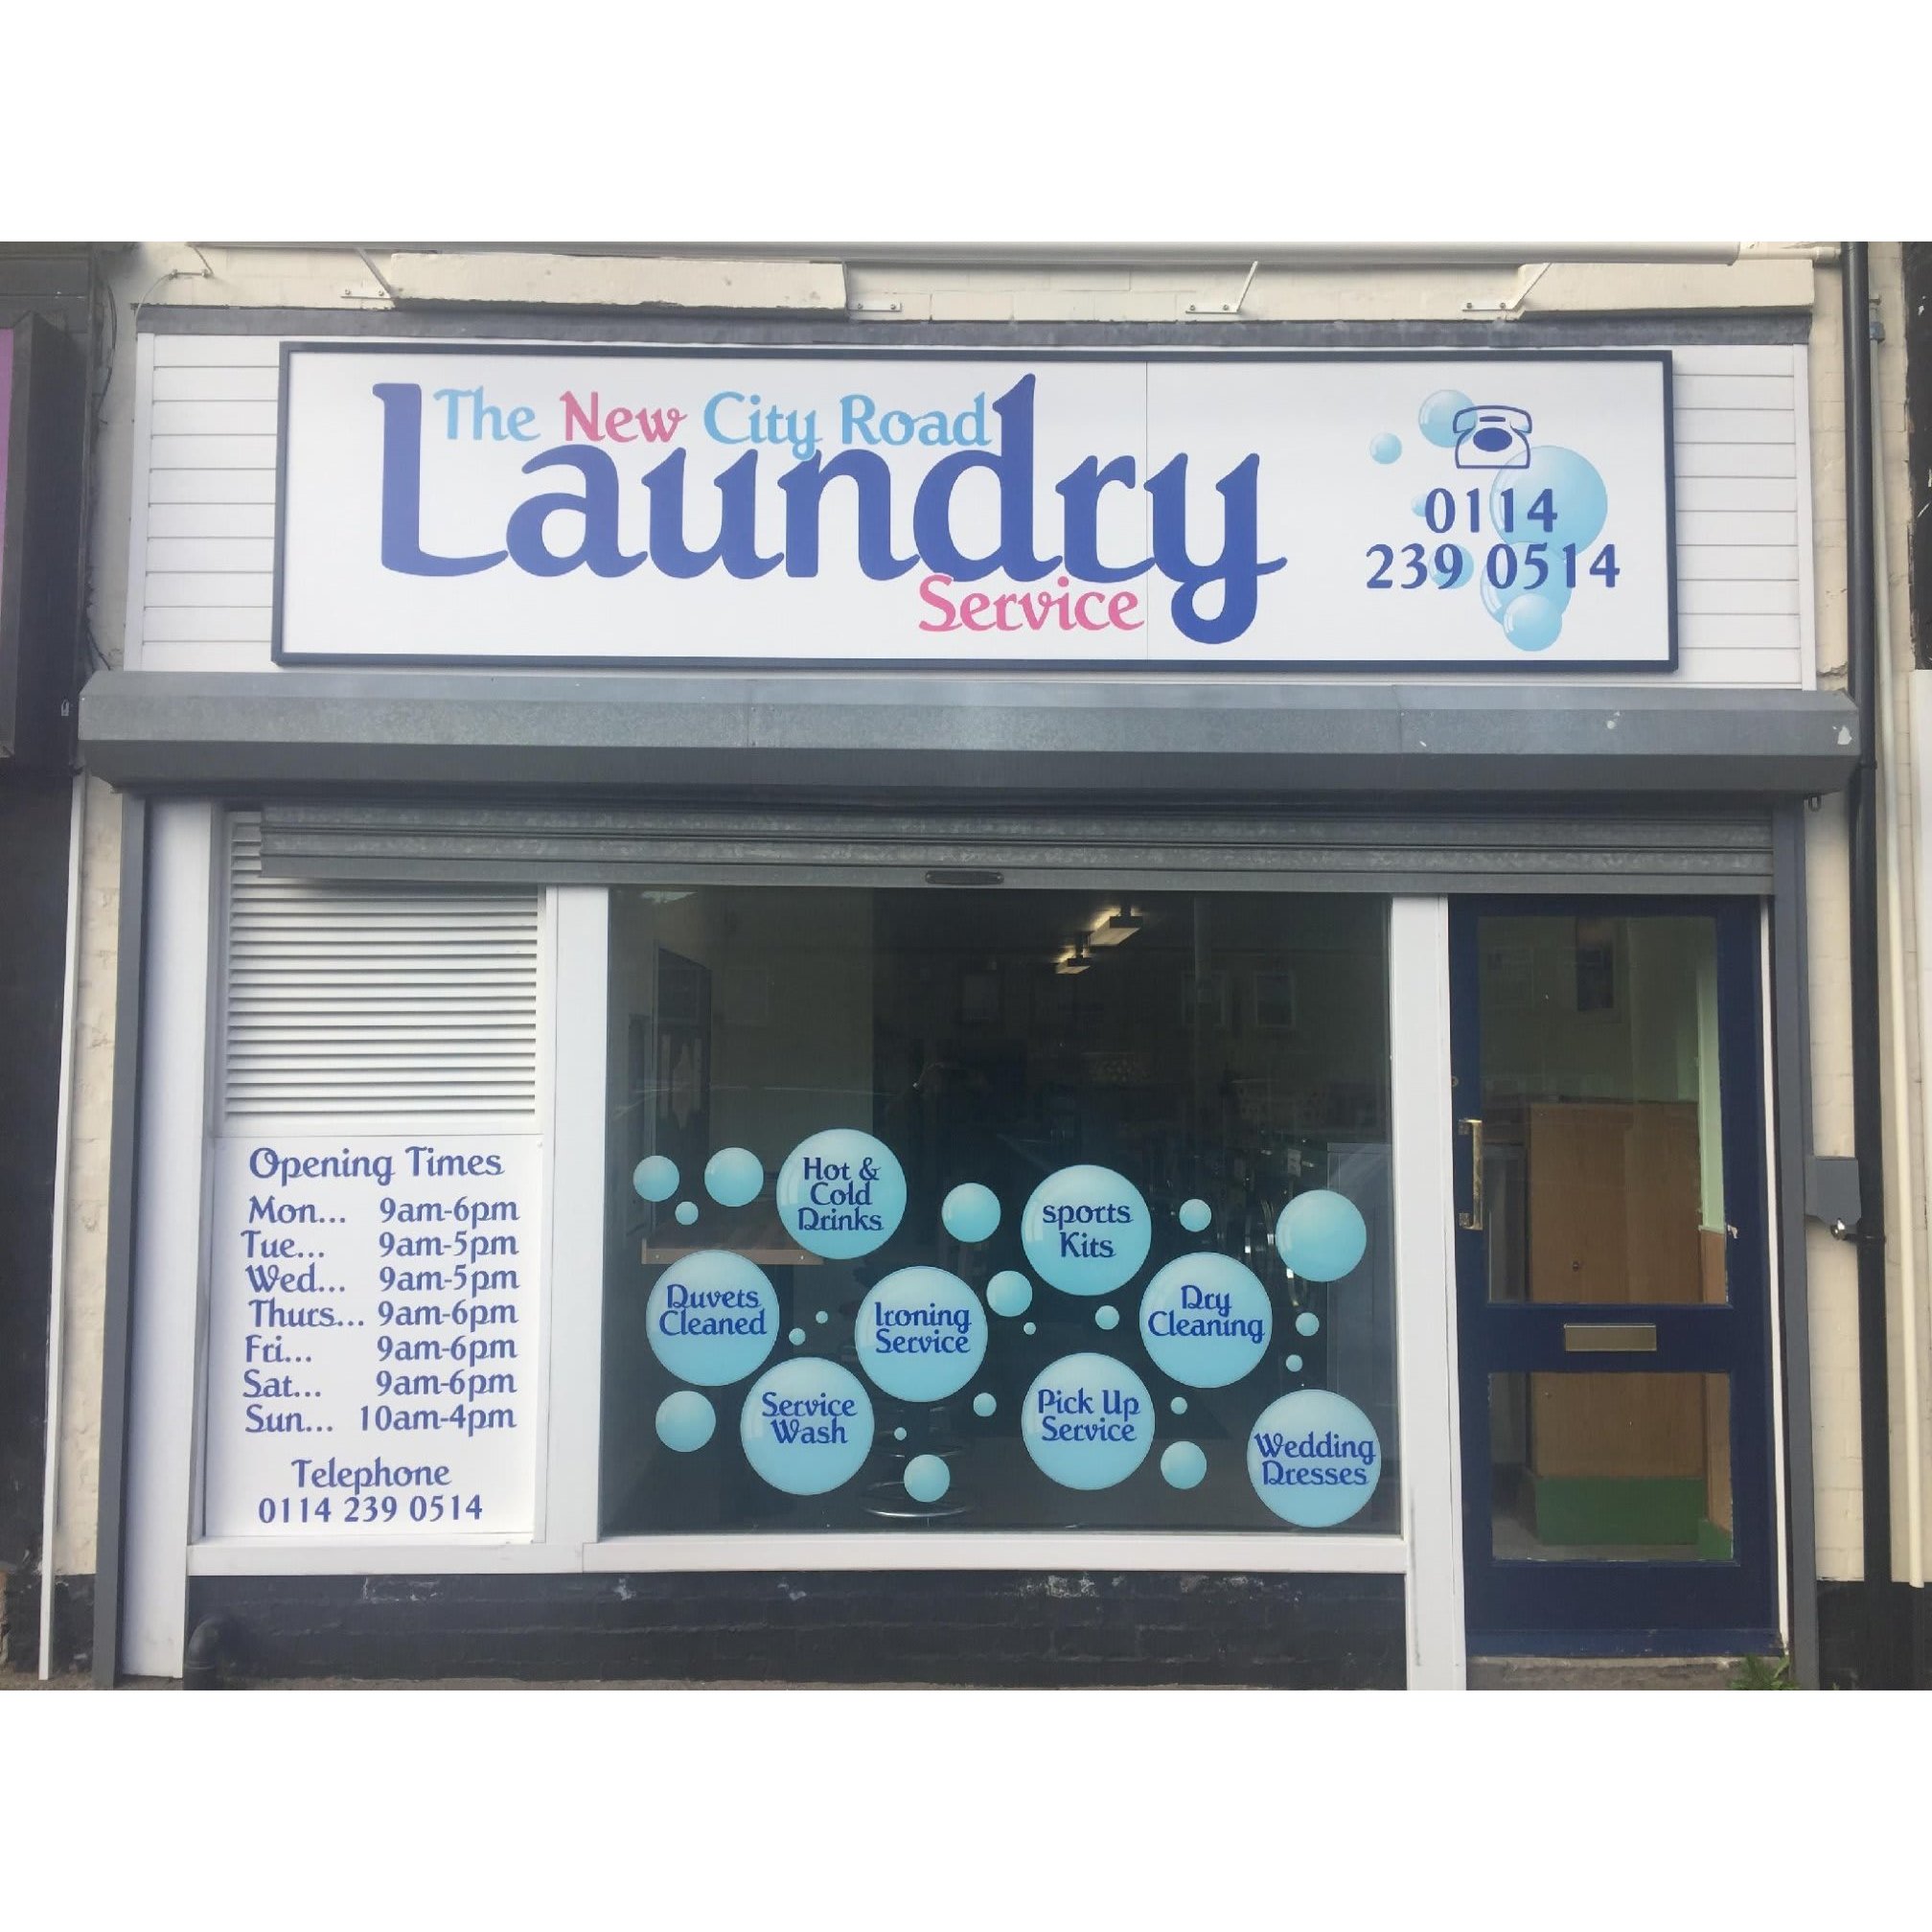 New City Road Laundry Service - Sheffield, South Yorkshire S2 1GJ - 01142 390514 | ShowMeLocal.com